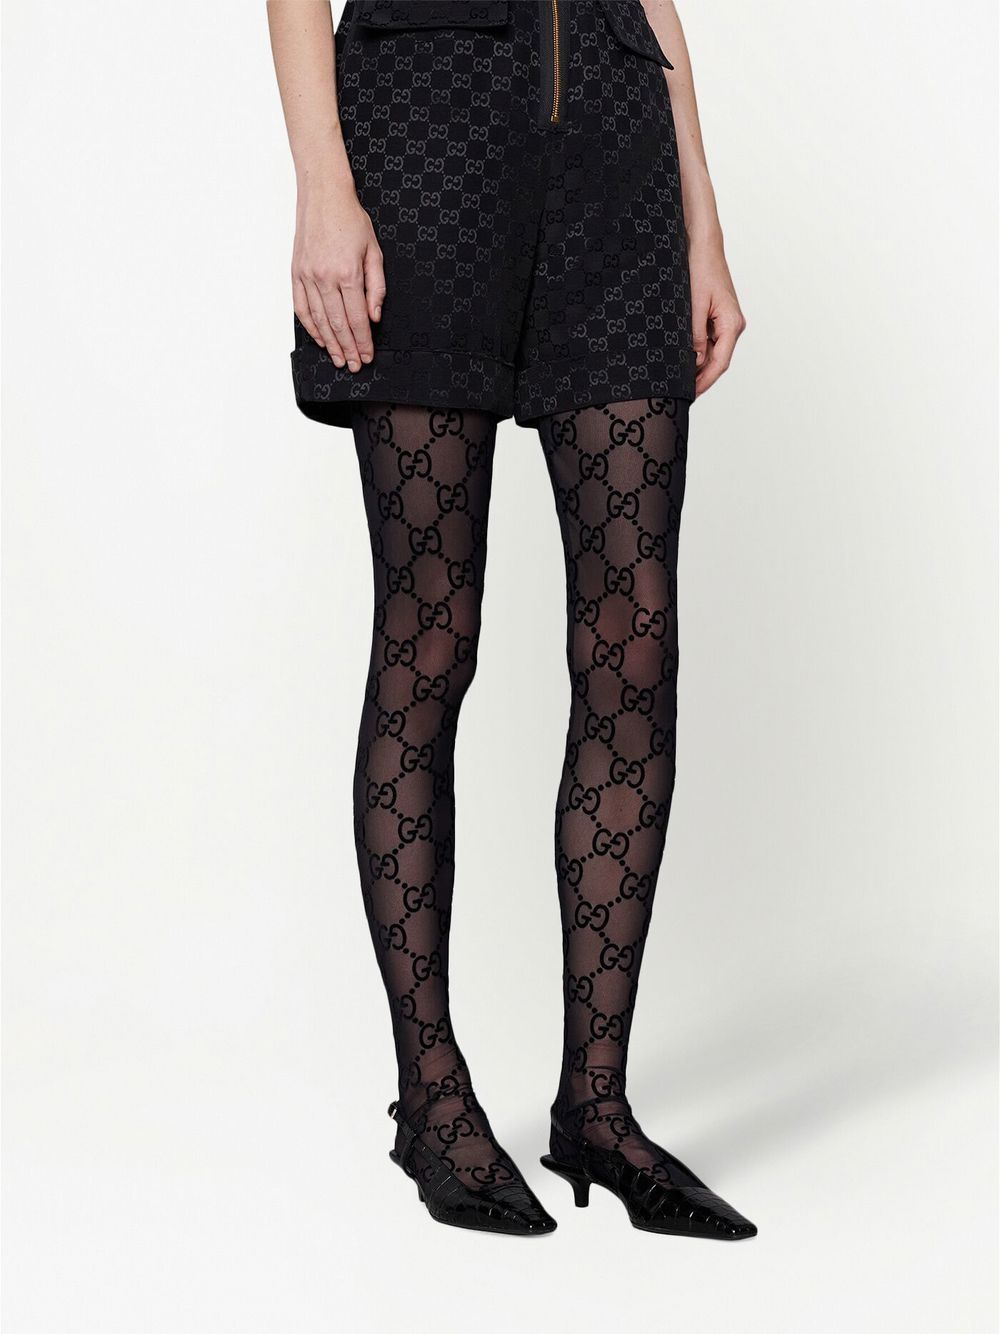 Gucci GG Patterned Tights - Farfetch